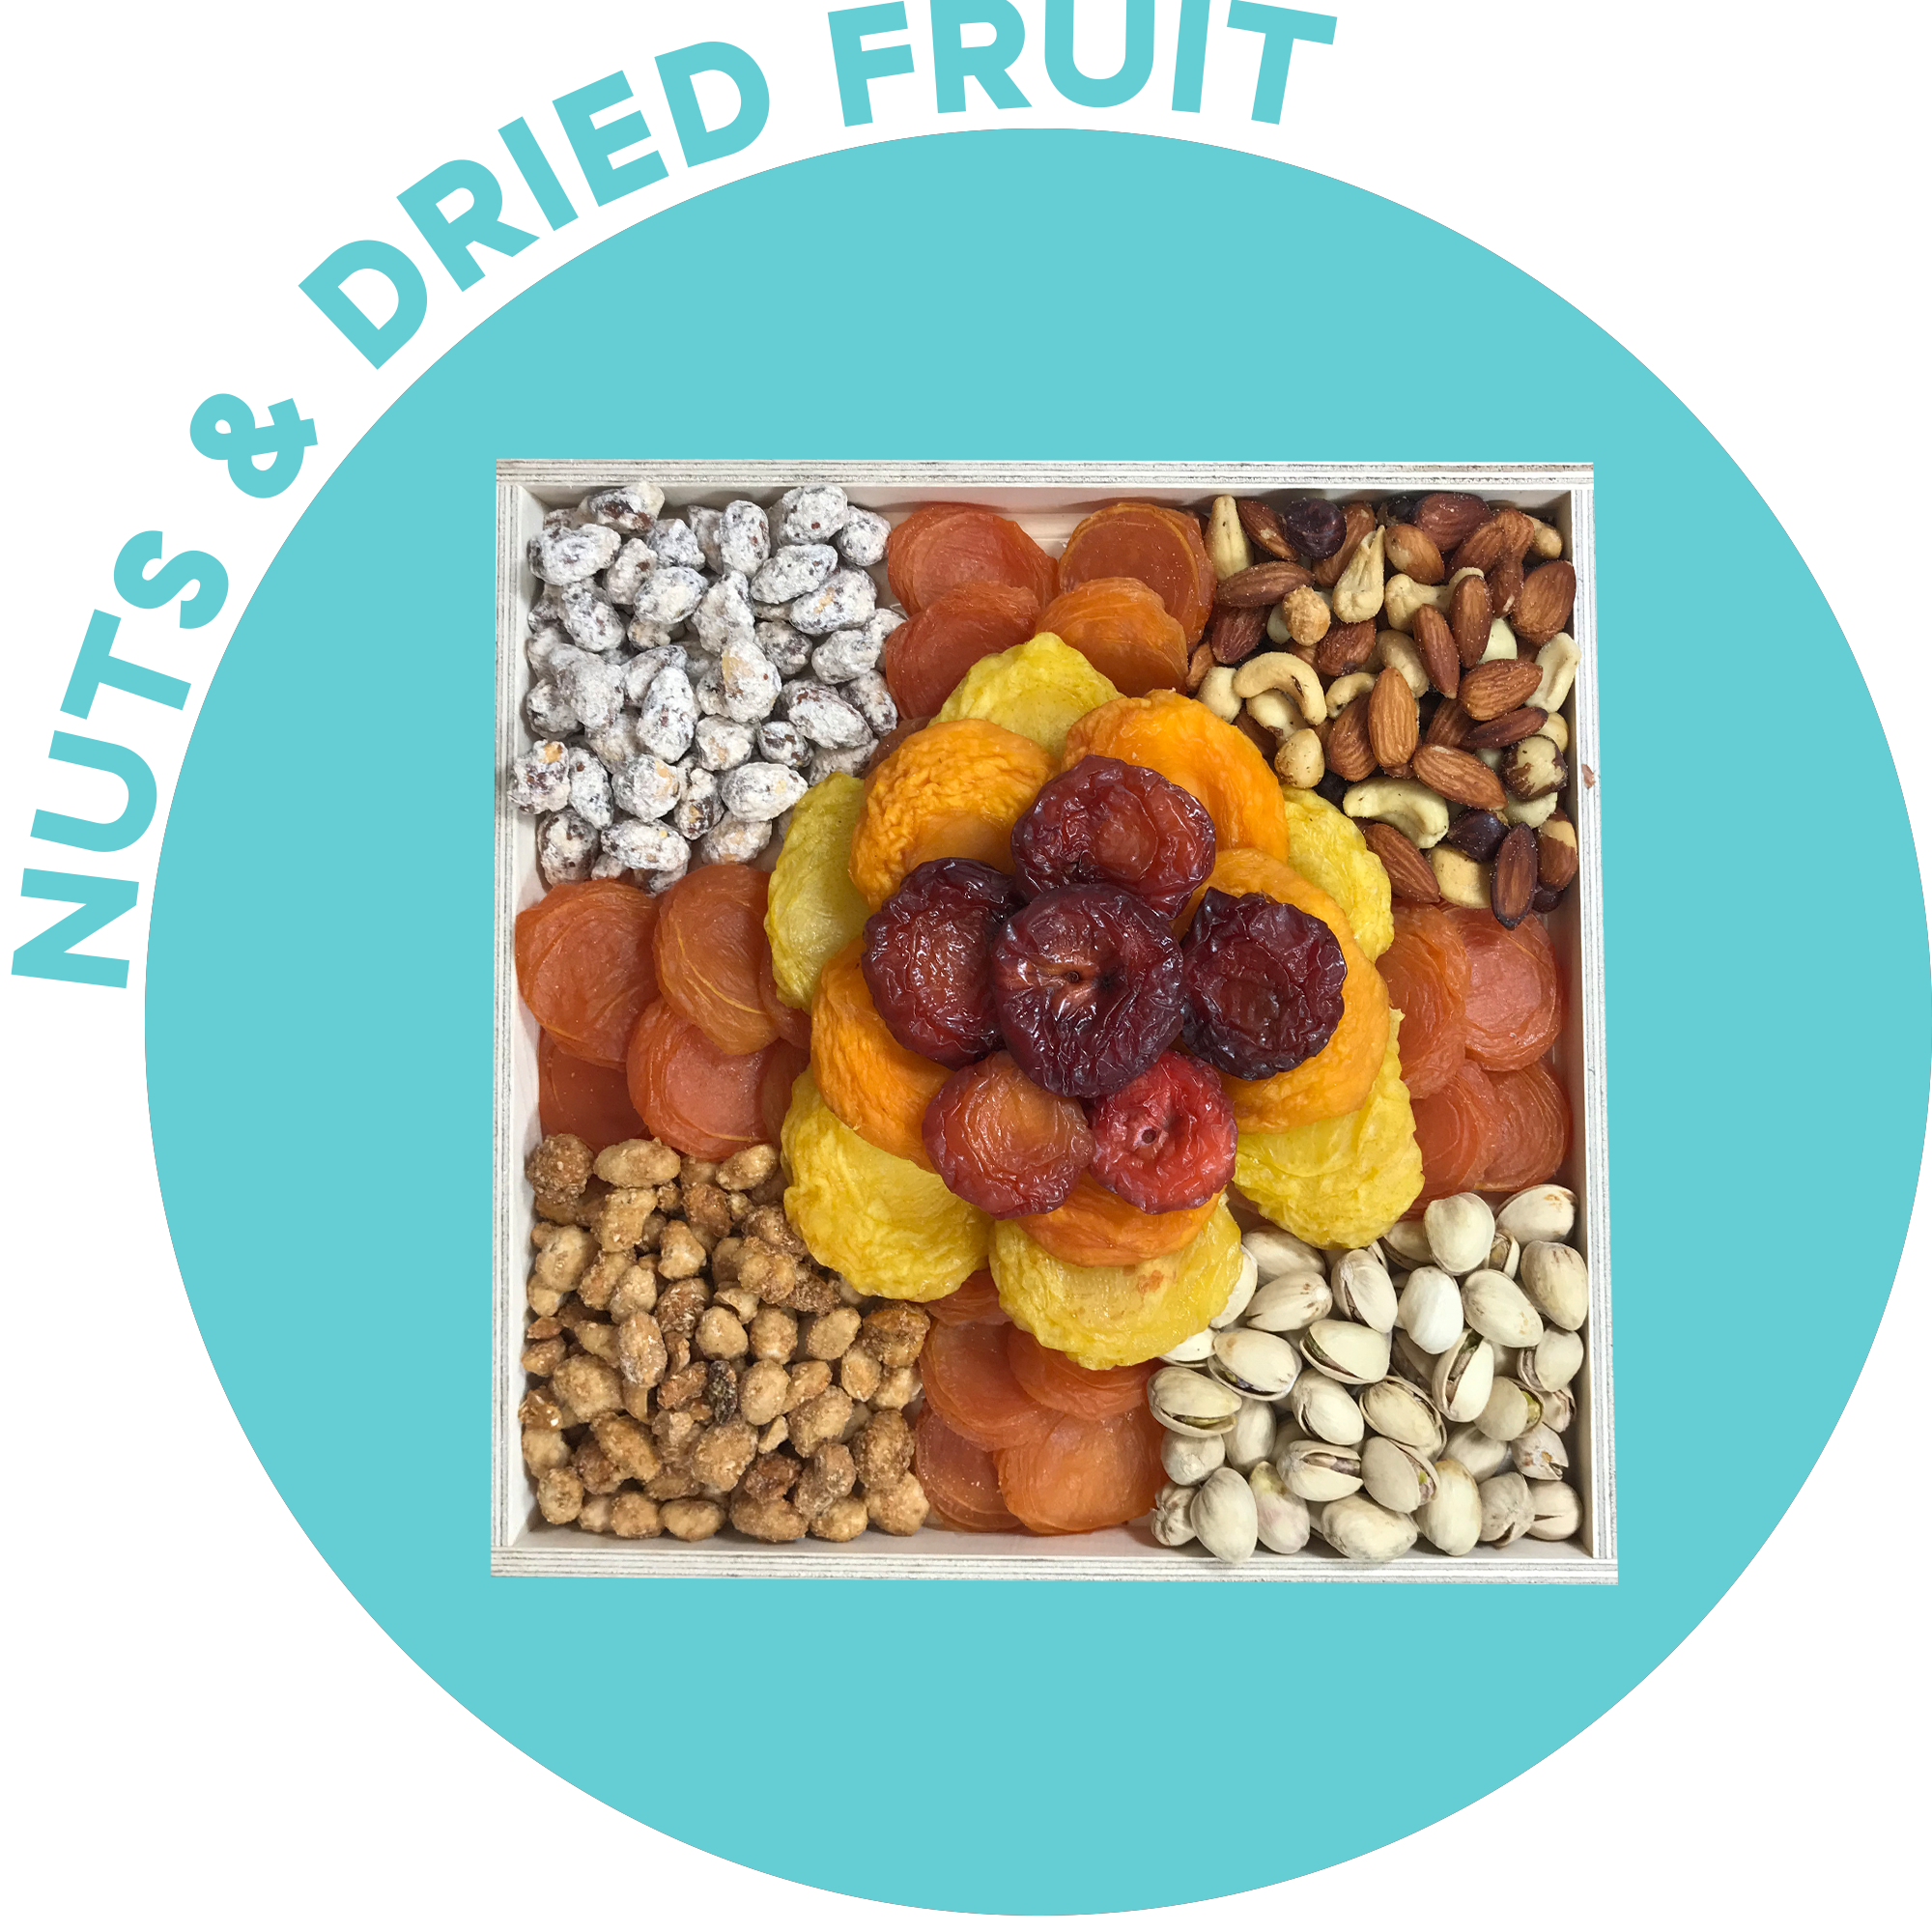 Breakfast cereal, Mixed nuts, Food, Meal, Natural foods, Dried fruit, Dish, Snack, Product, Superfood, 